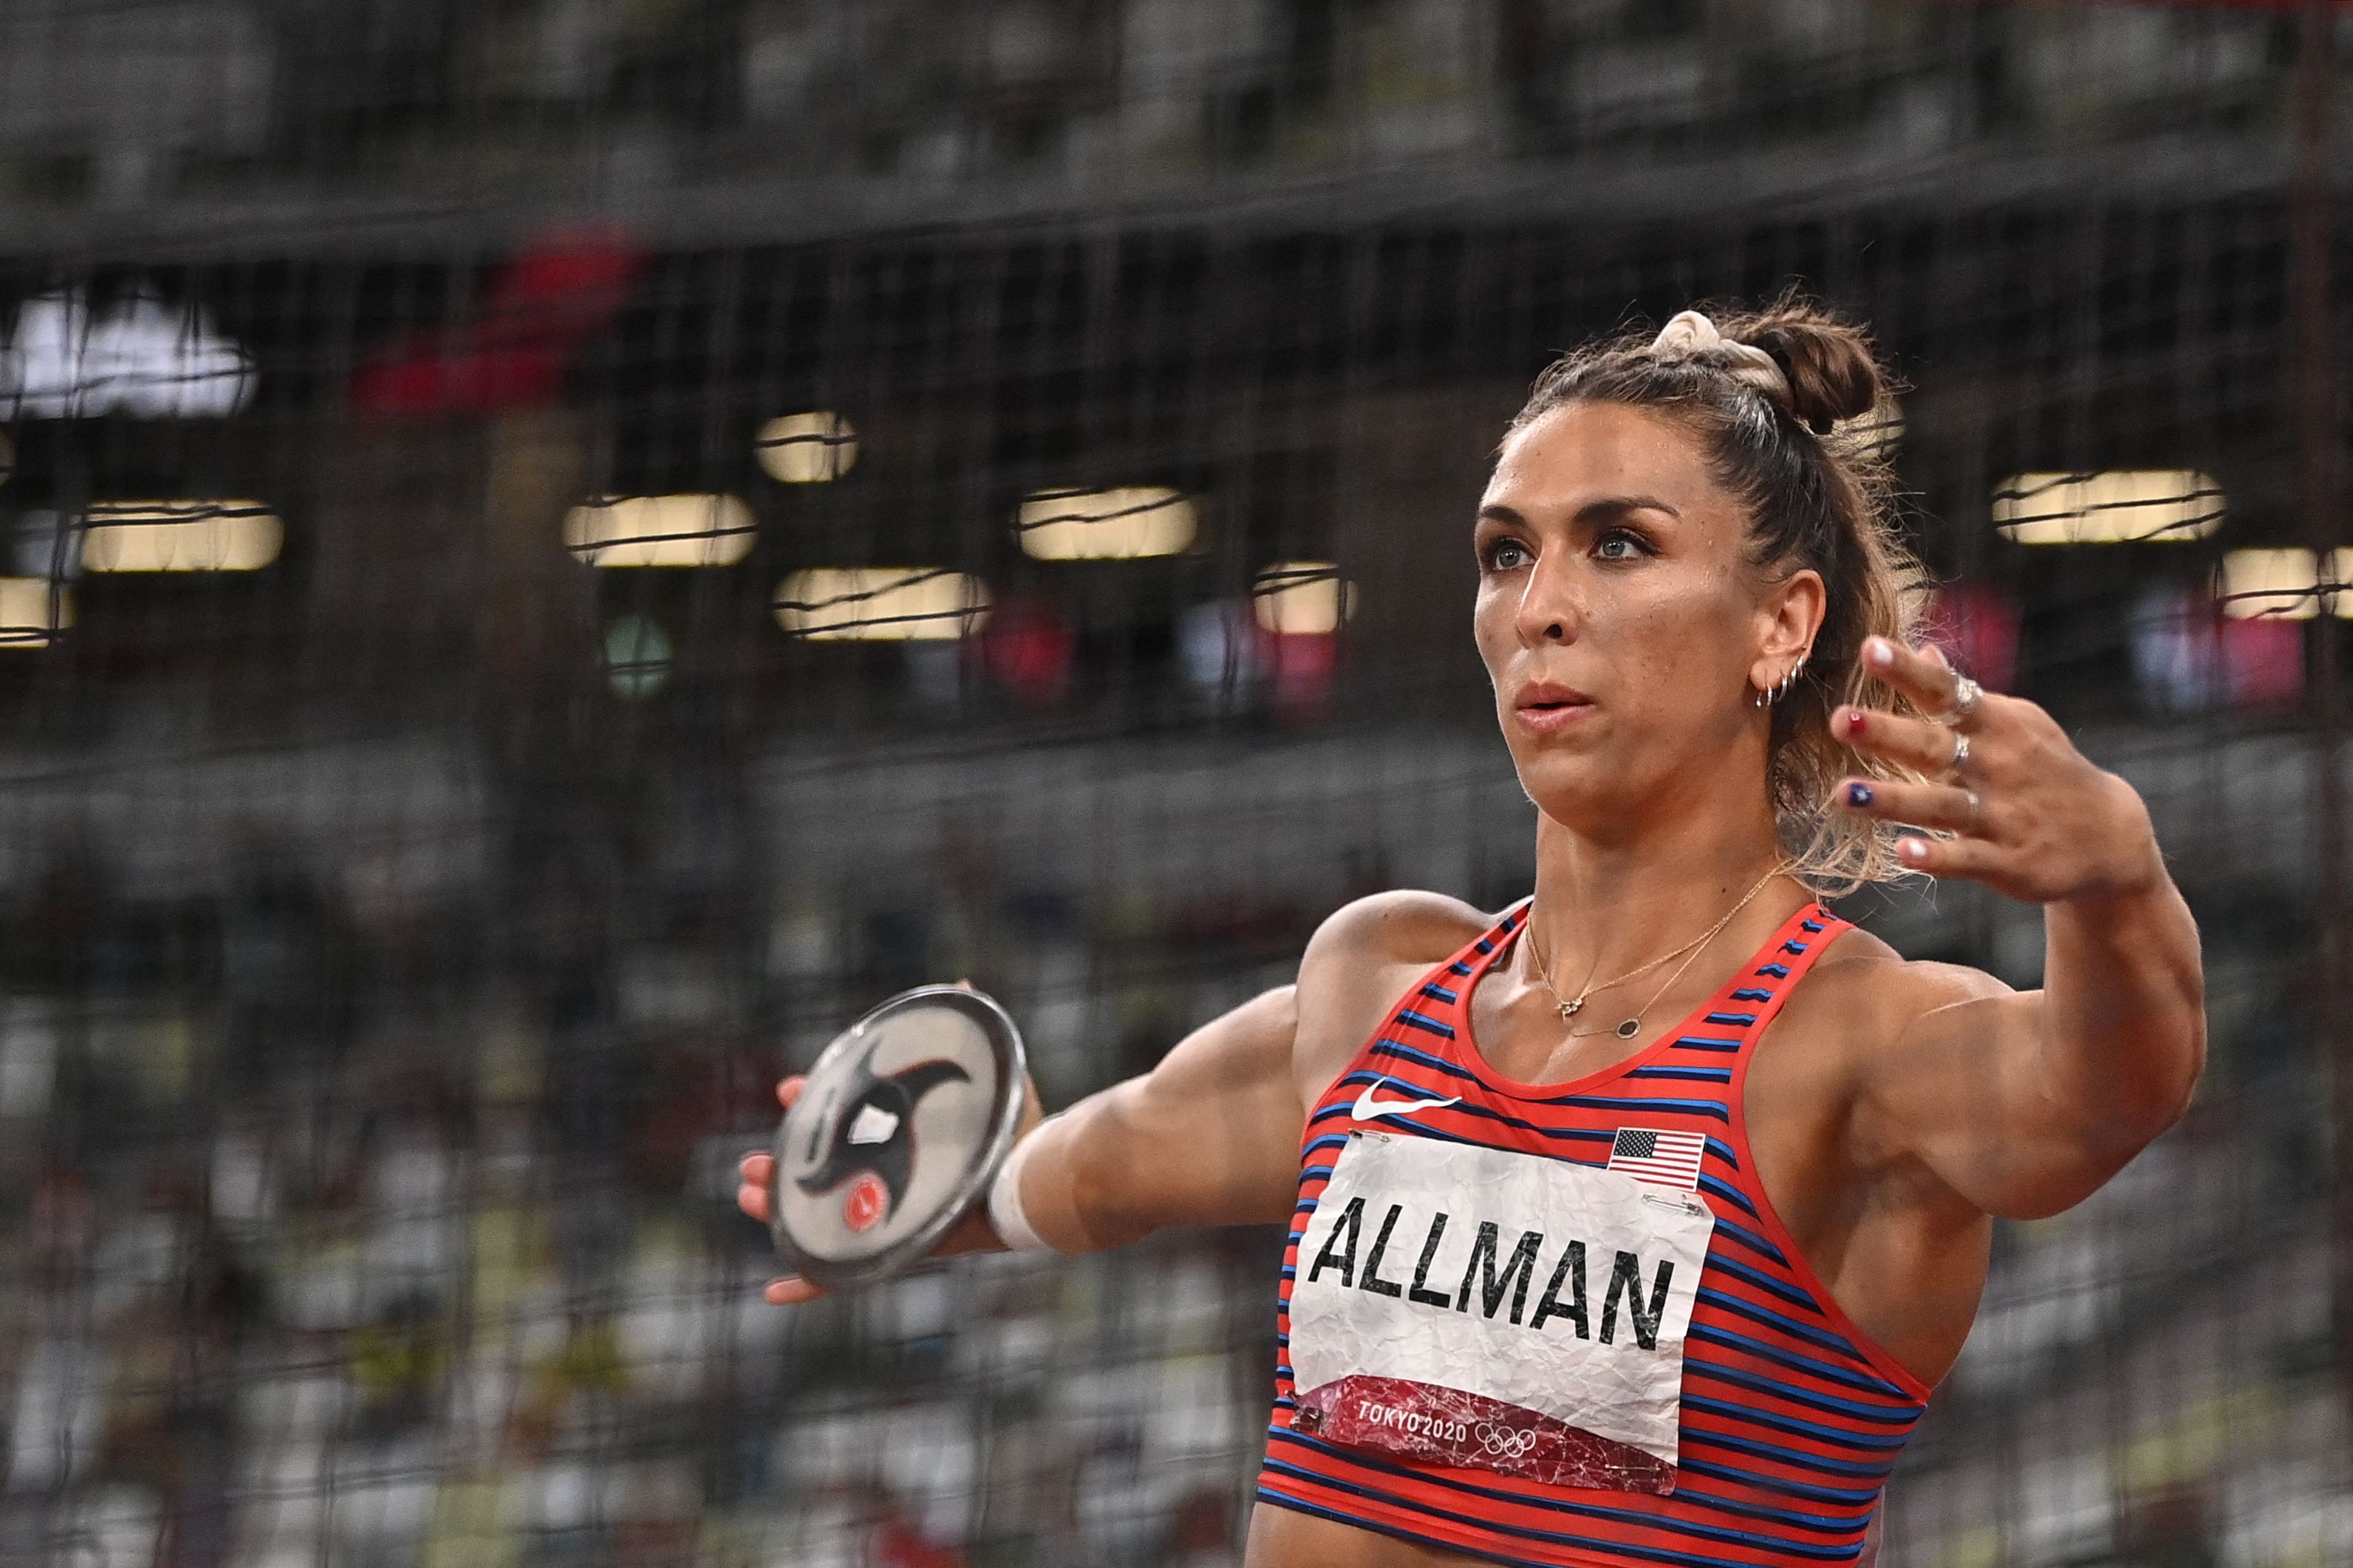 Discus winner Valarie Allman at the Tokyo Olympic Games